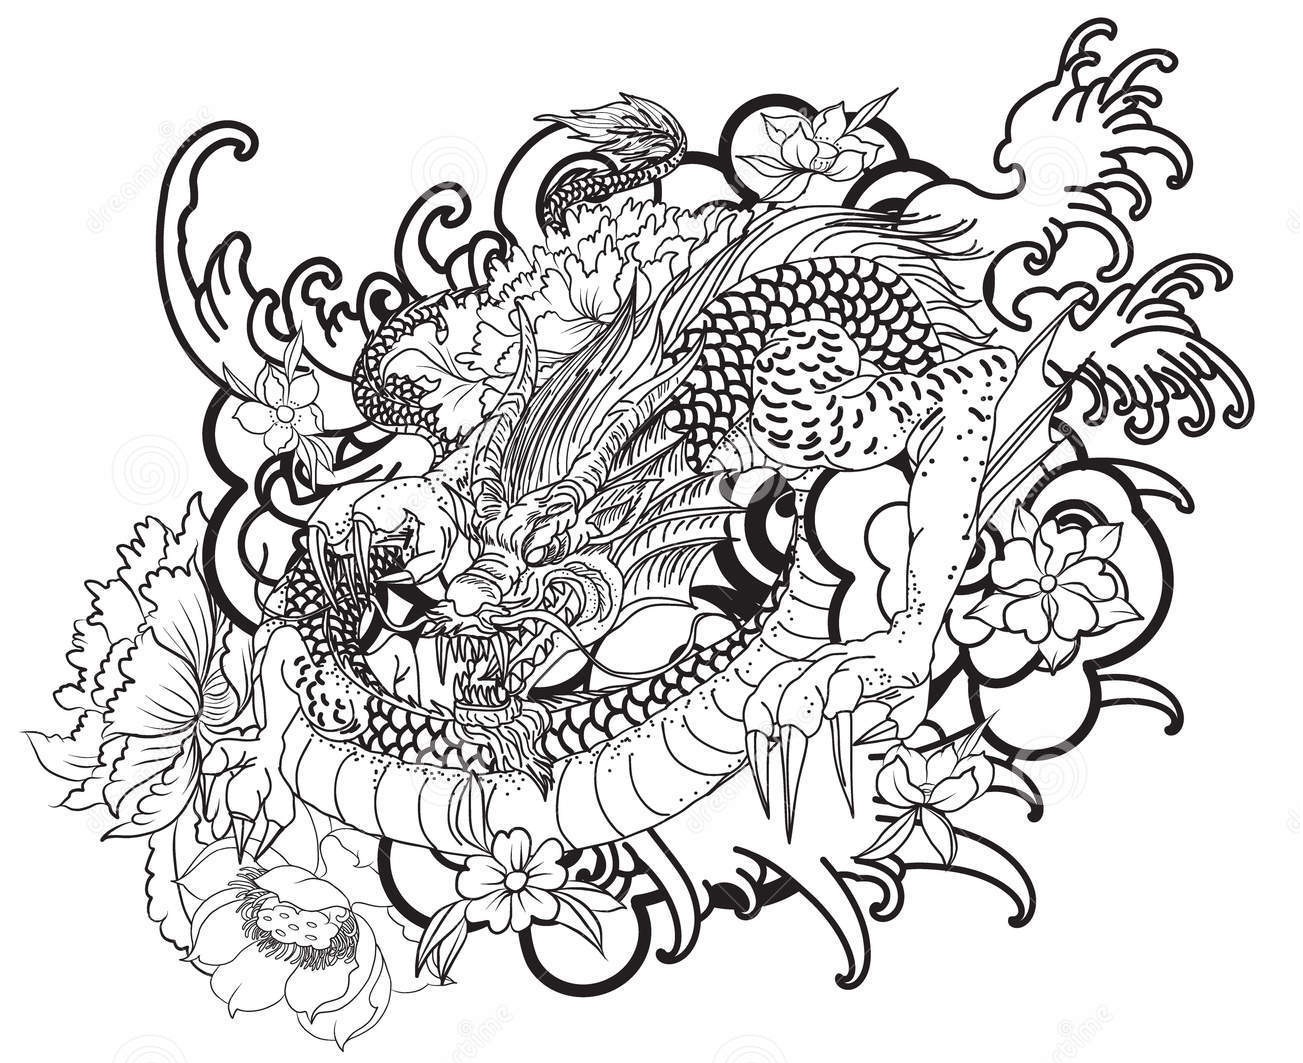 Tattoos Coloring Pages for Adults Coloring Article - Coloring Articles